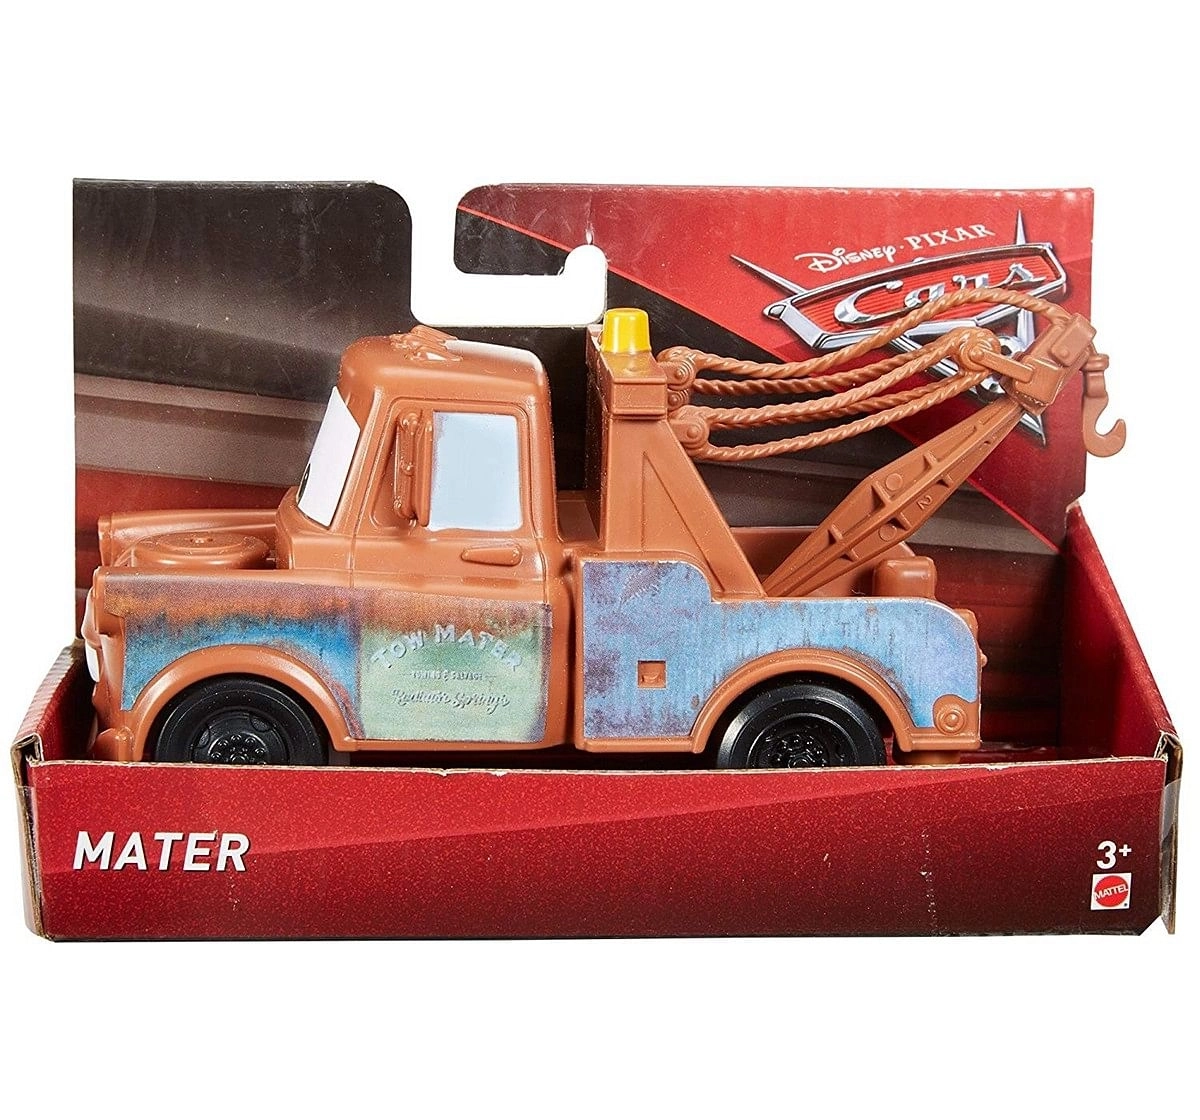 Disney Cars Value Vehicle Mater Vehicles for Kids age 3Y+, Assorted